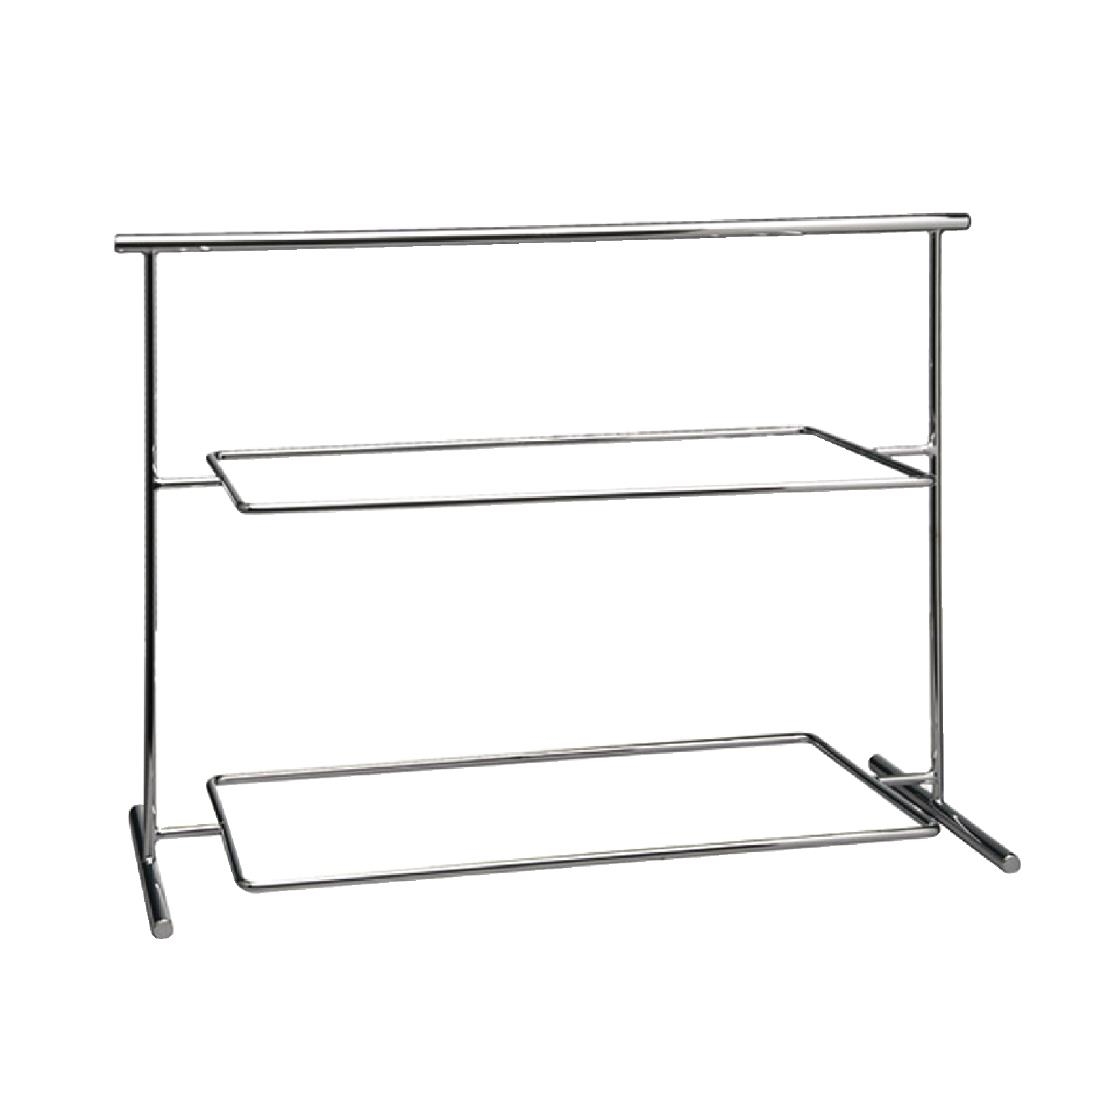 APS Pure Melamine Chrome Serving Stand 630mm